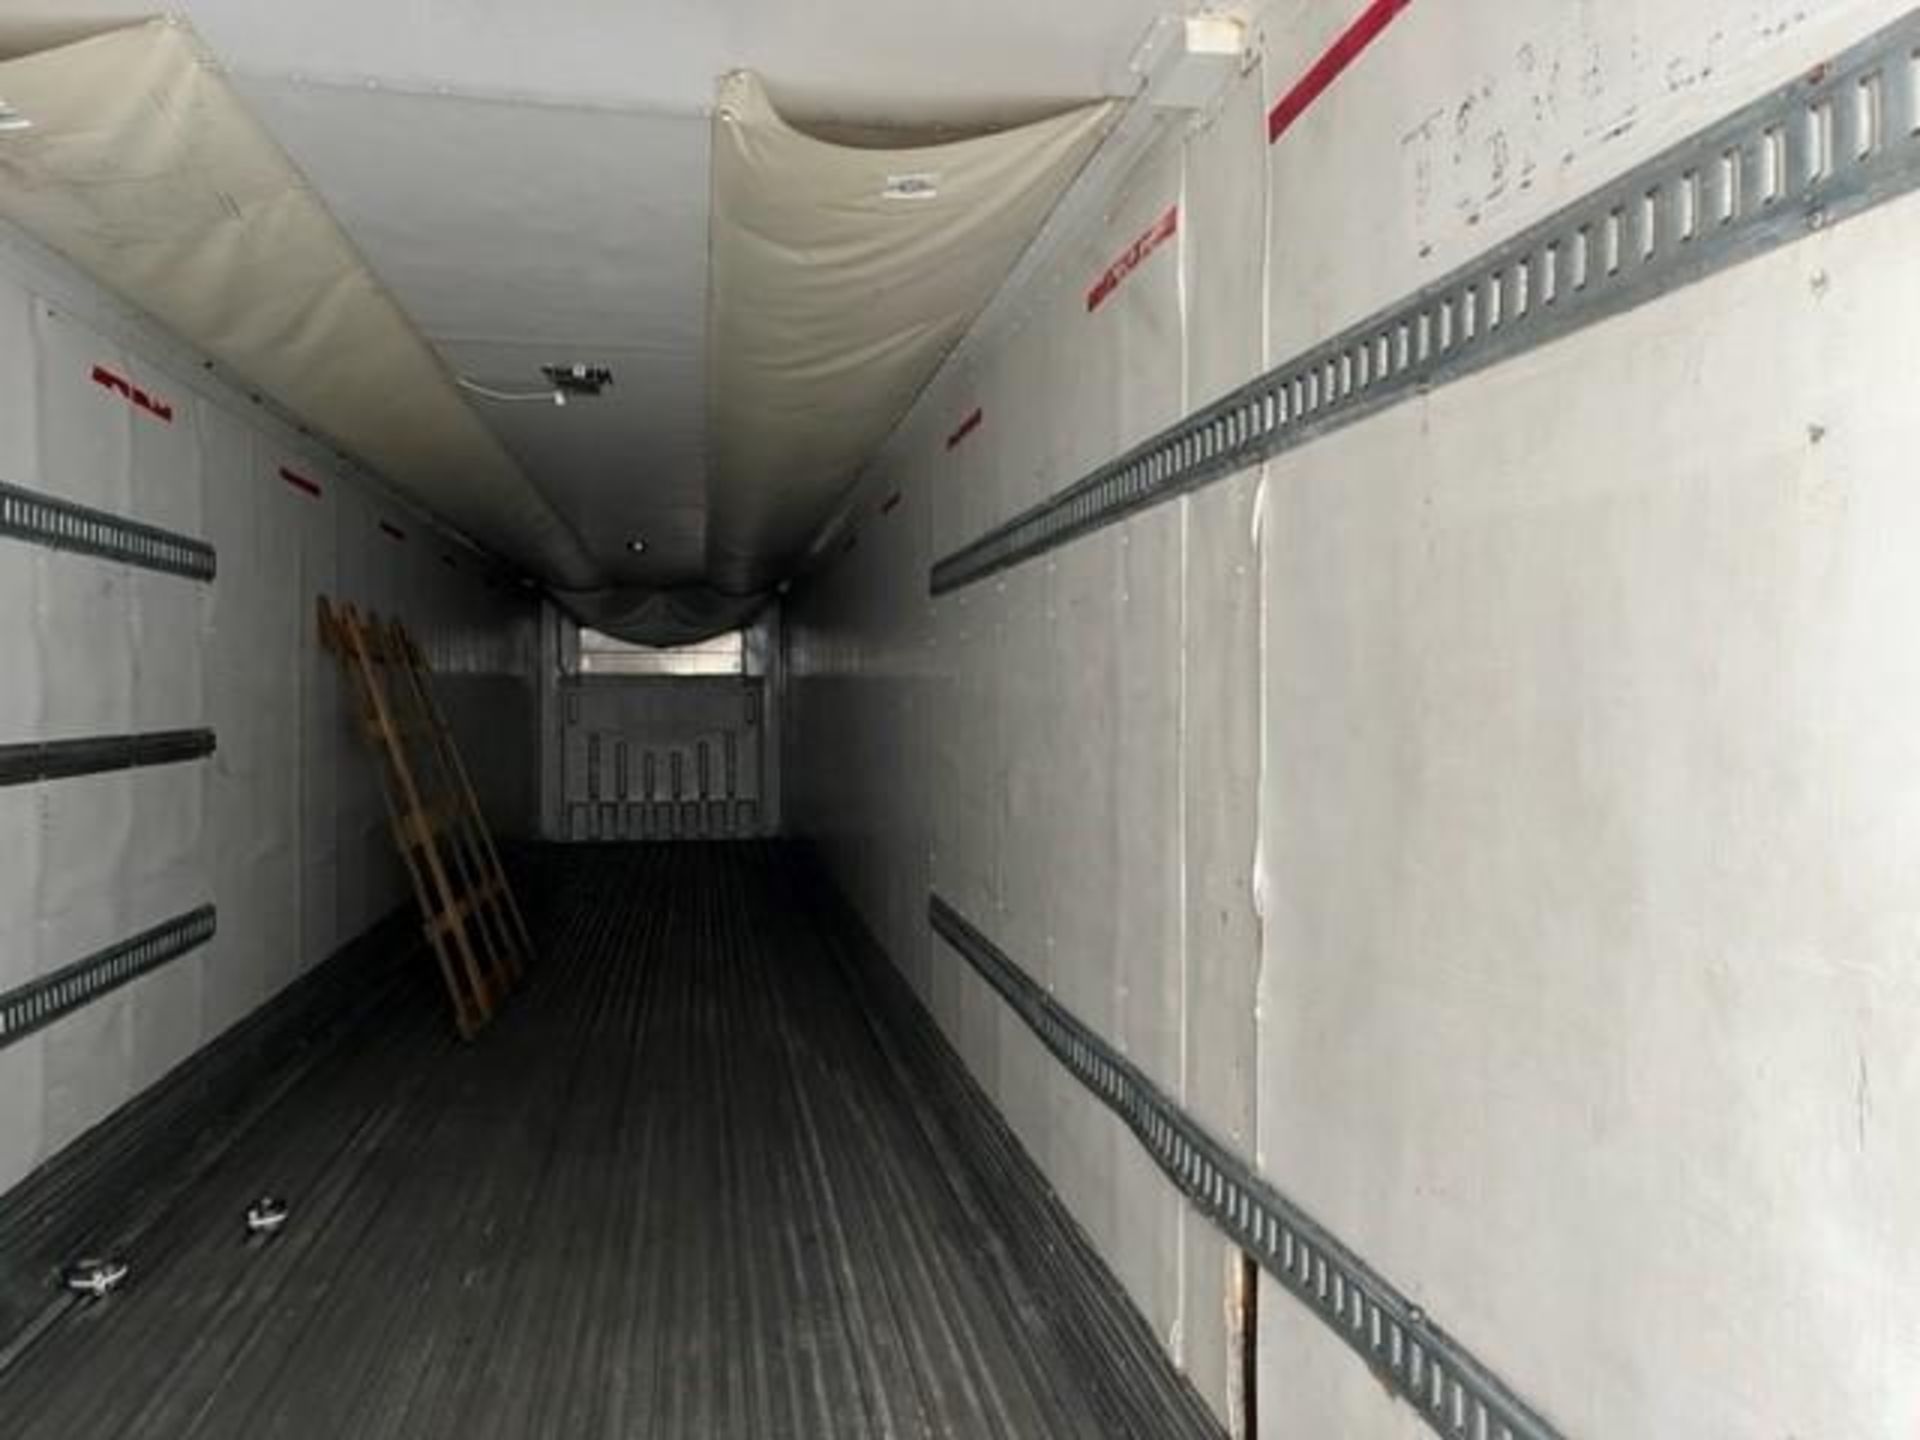 2014 53’ Hyundai Insulated Container with Carrier X7300 Refrigeration Units with 130 Gallon Diesel T - Image 2 of 8